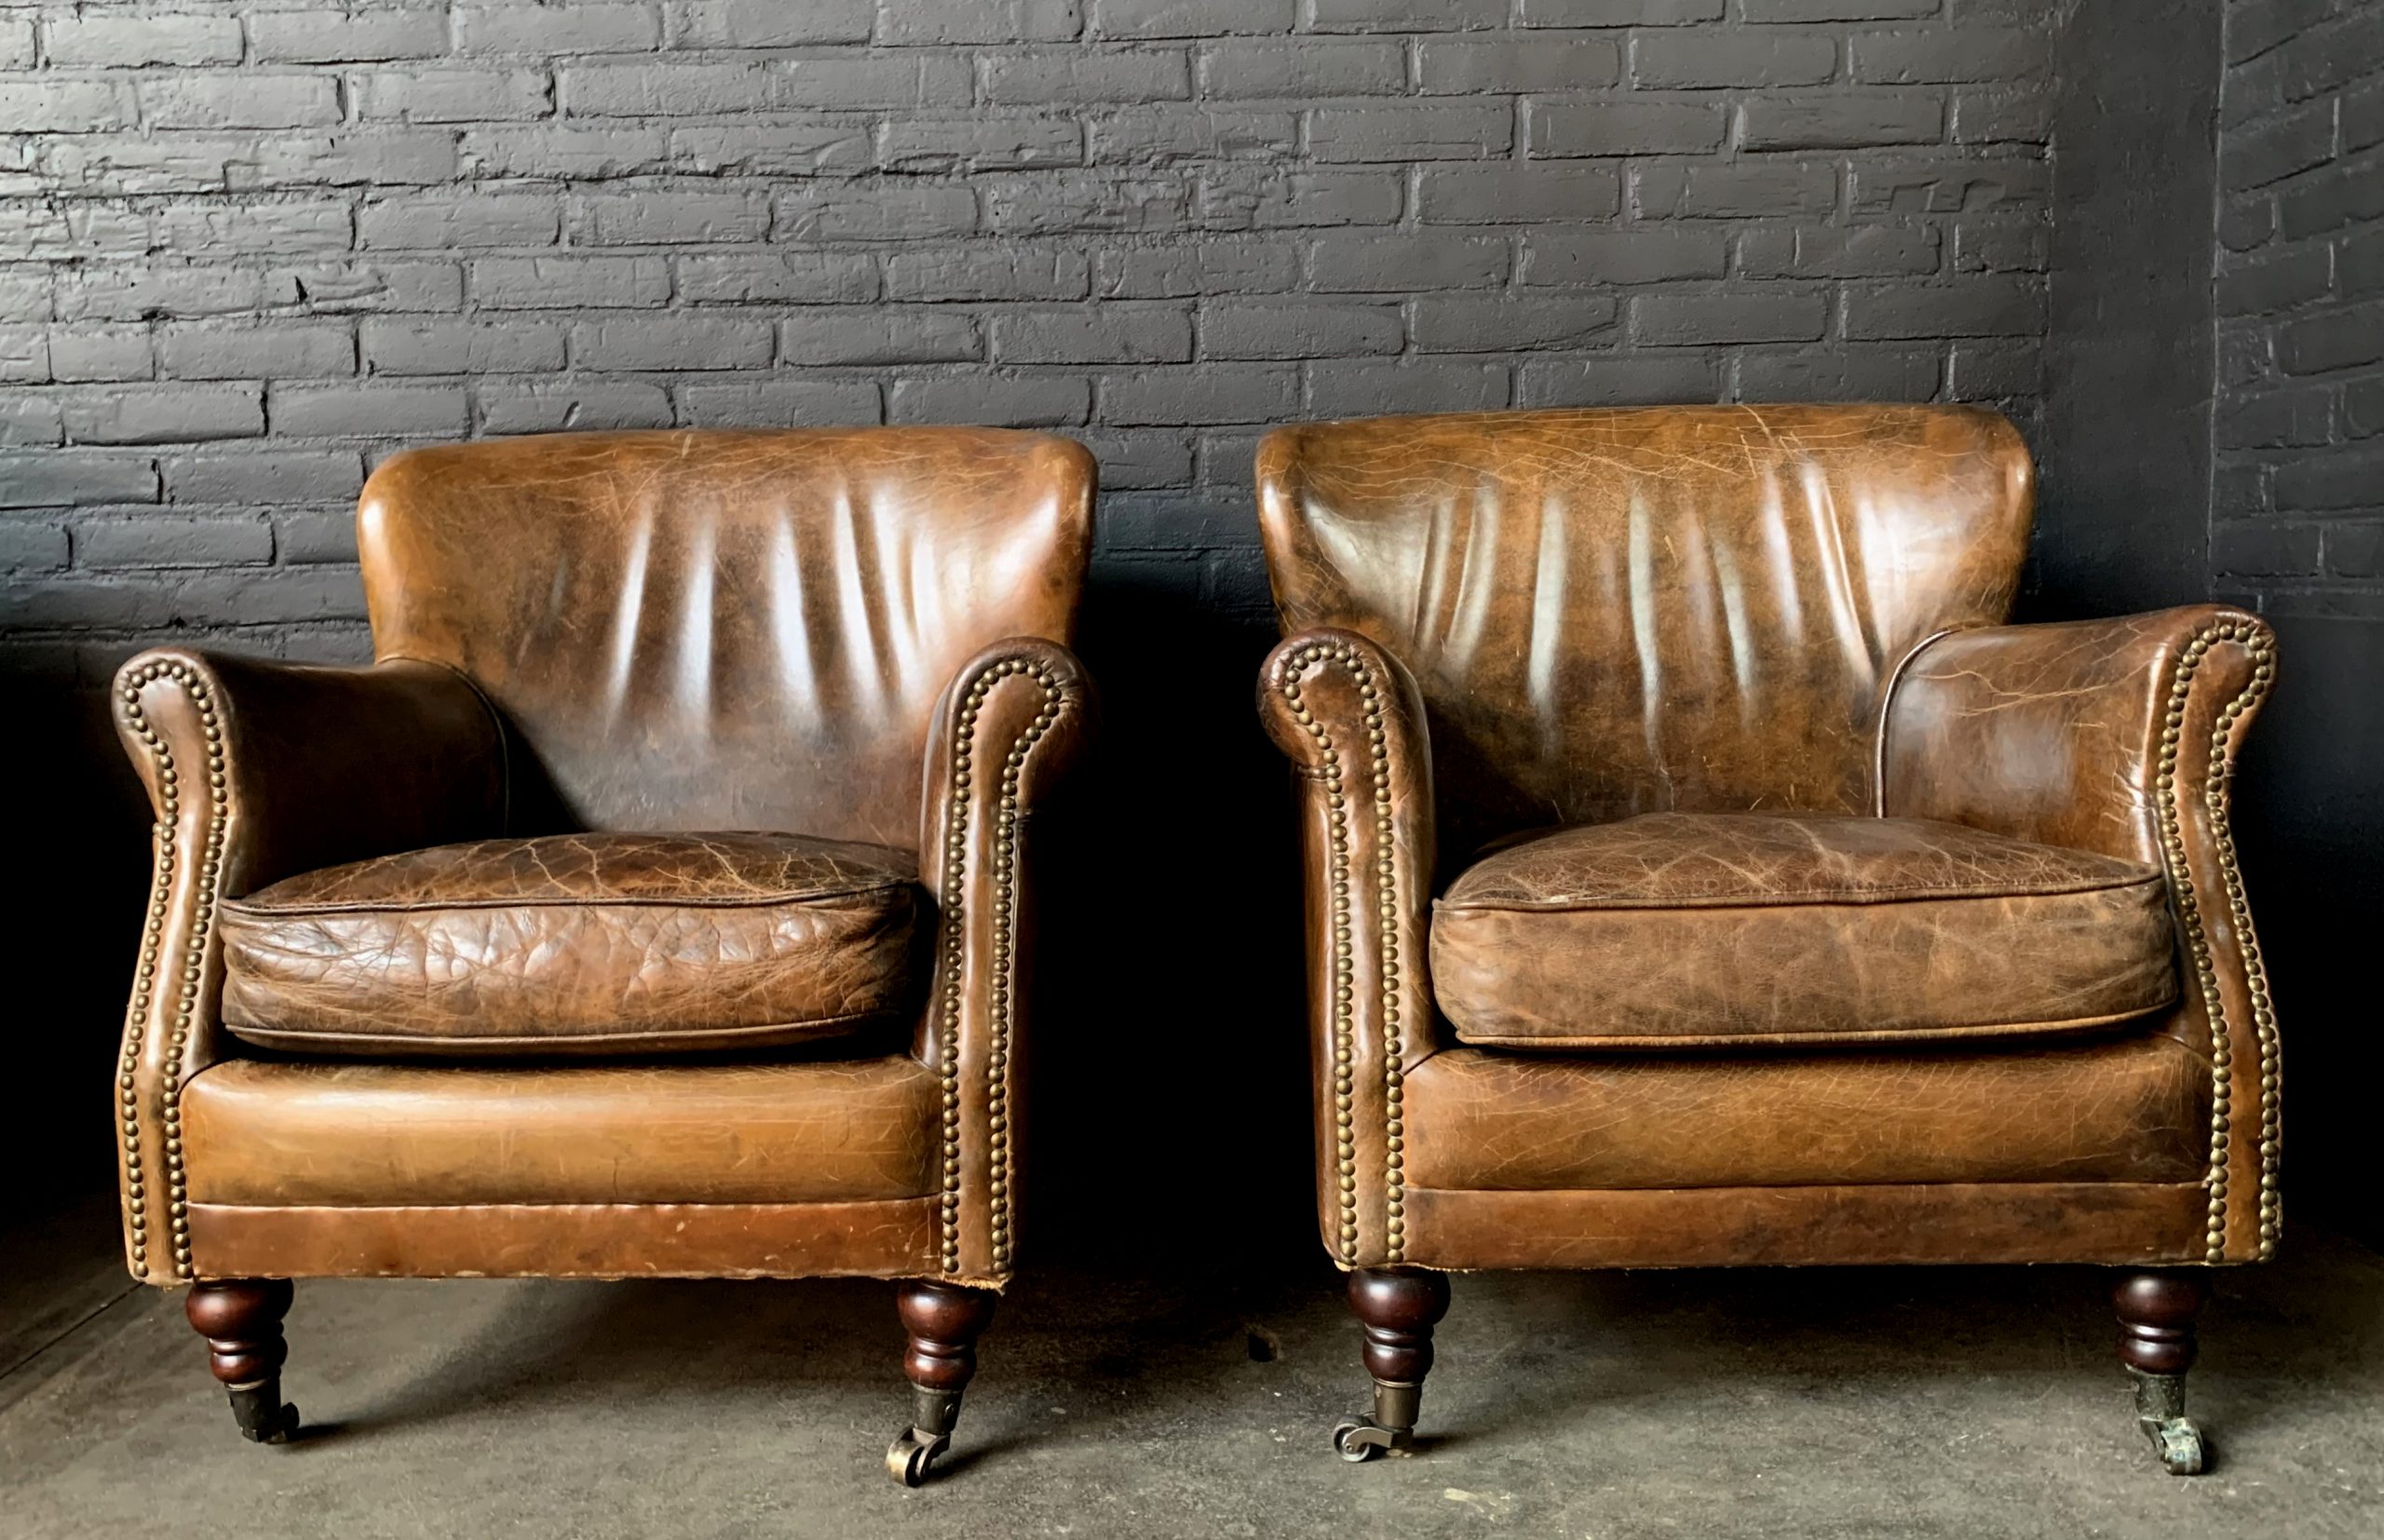 Overleving Oh jee Oneindigheid Pair of brown-colored leather Ralph Lauren club chairs - BEAST Interiors